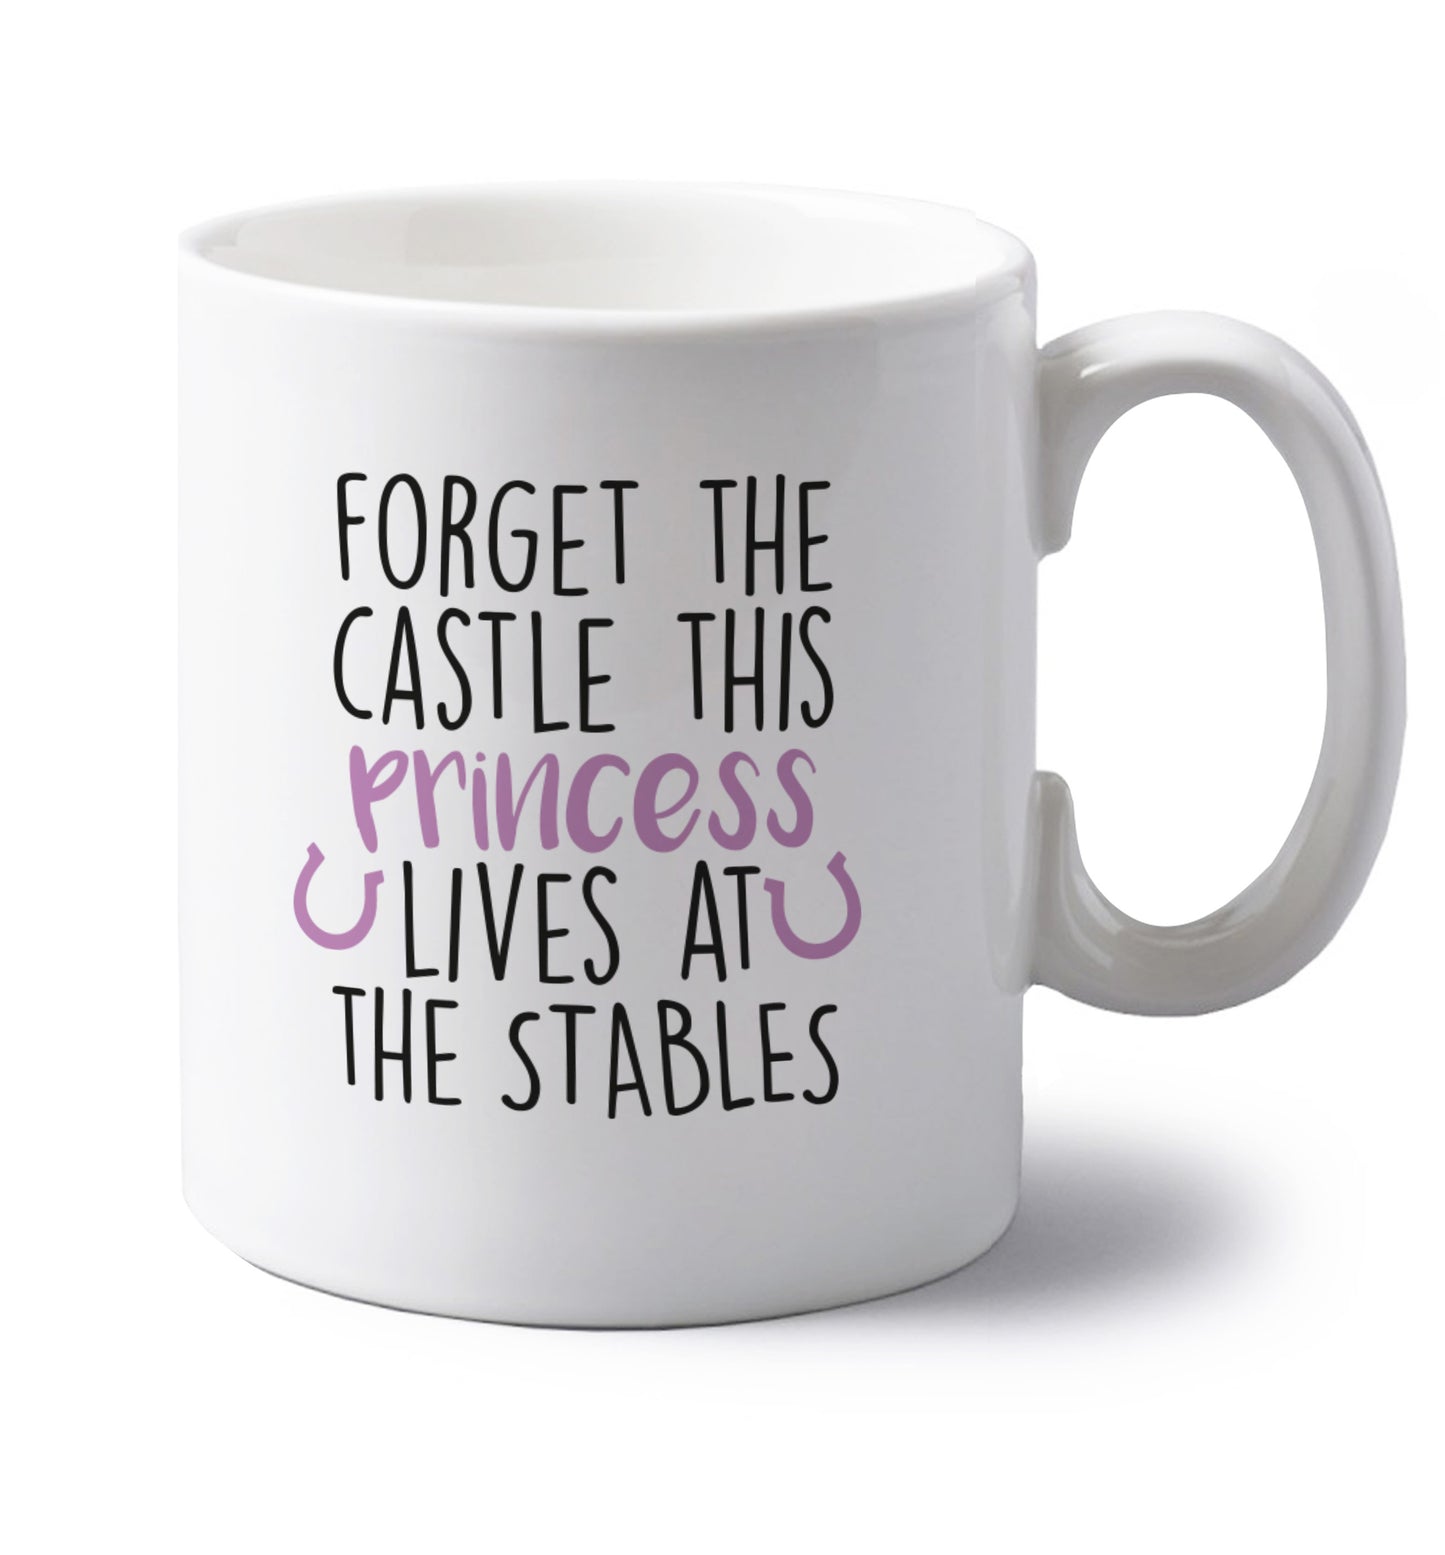 Forget the castle this princess lives at the stables left handed white ceramic mug 